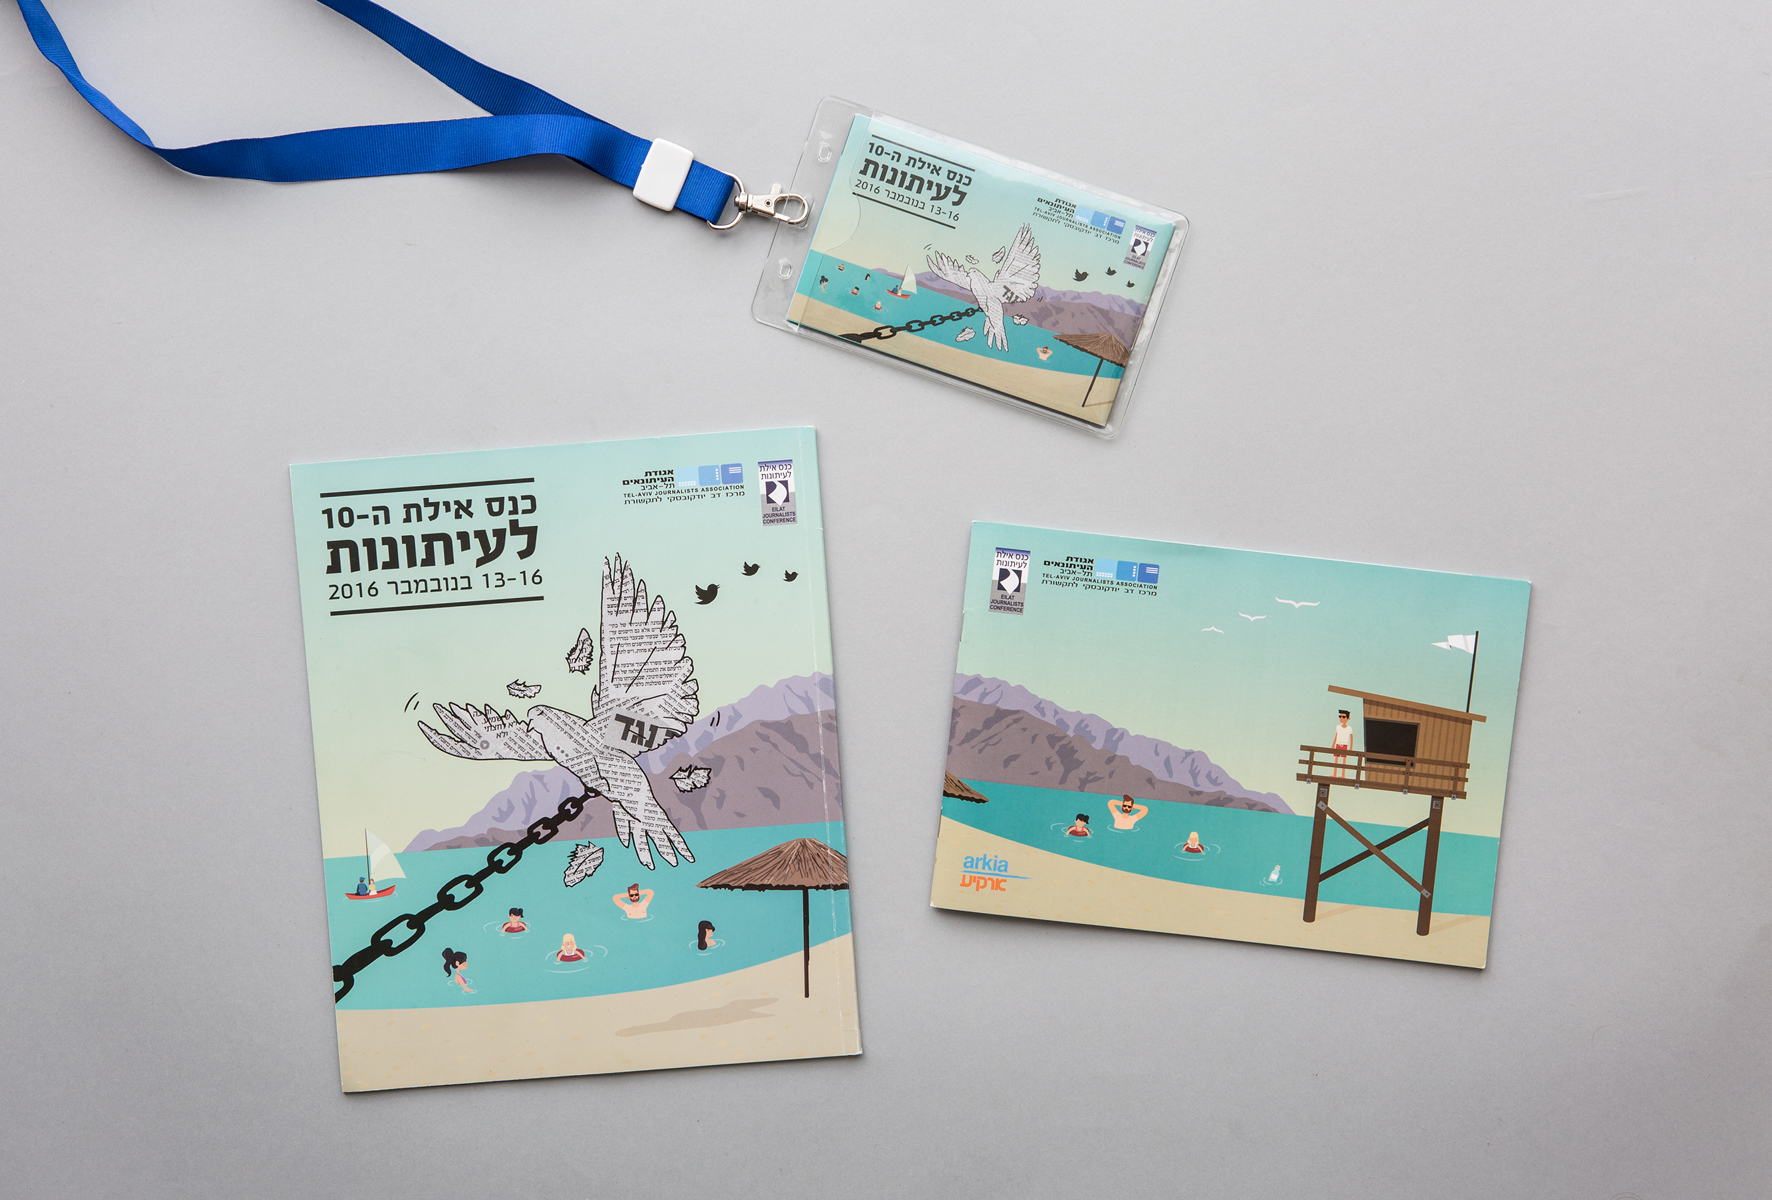 The 10th Eilat Journalism Conference 